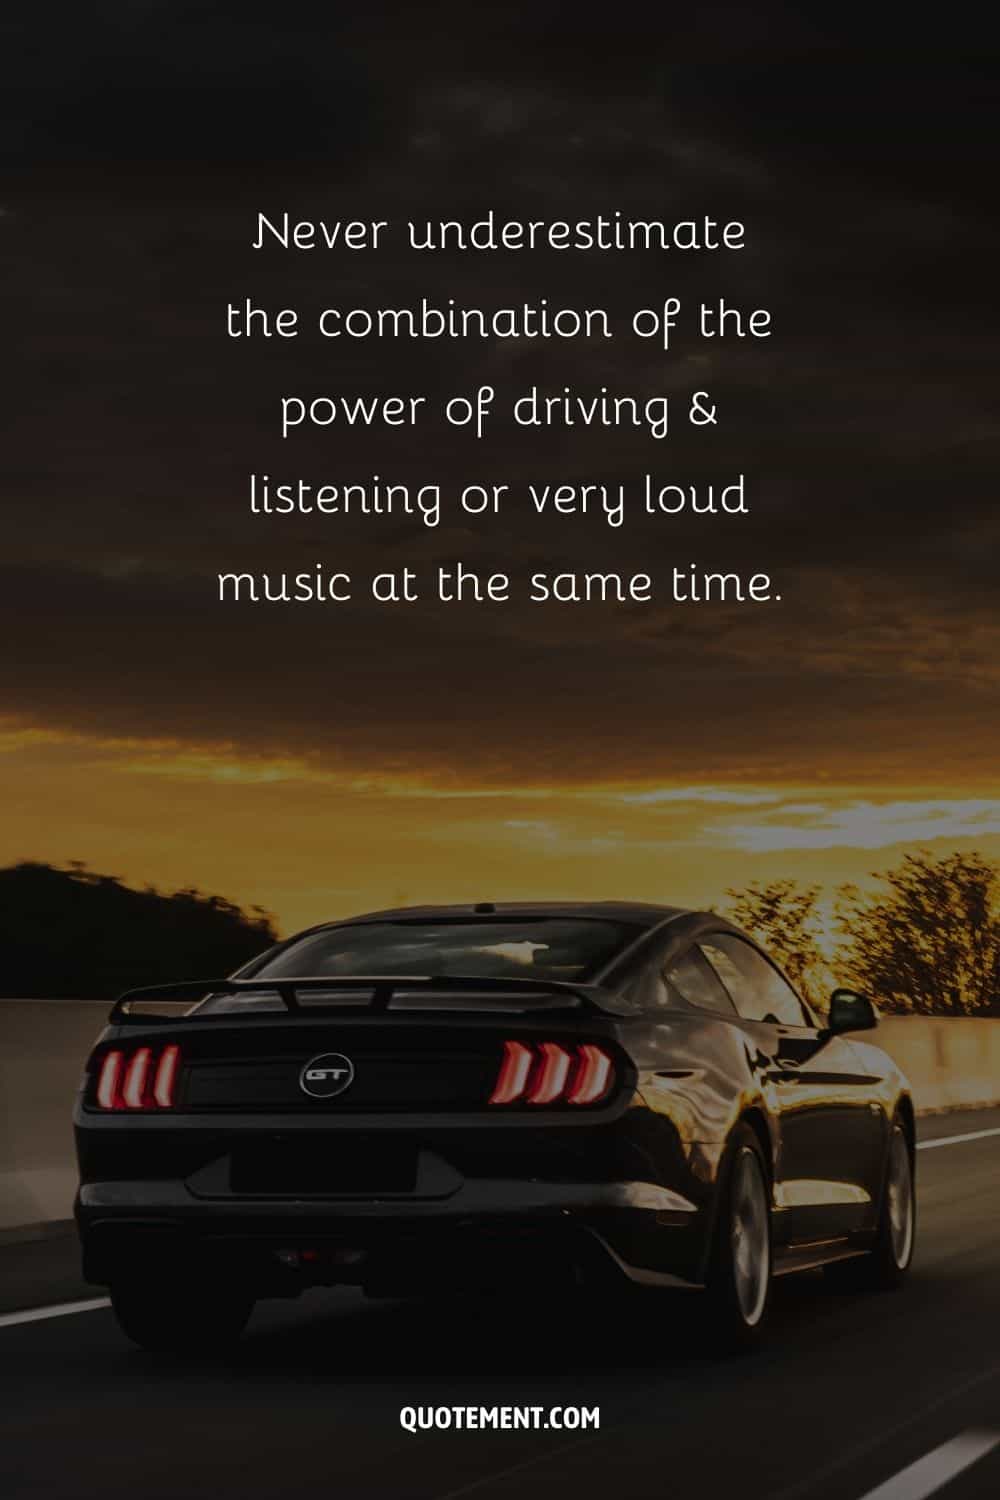 “Never underestimate the combination of the power of driving & listening or very loud music at the same time.”